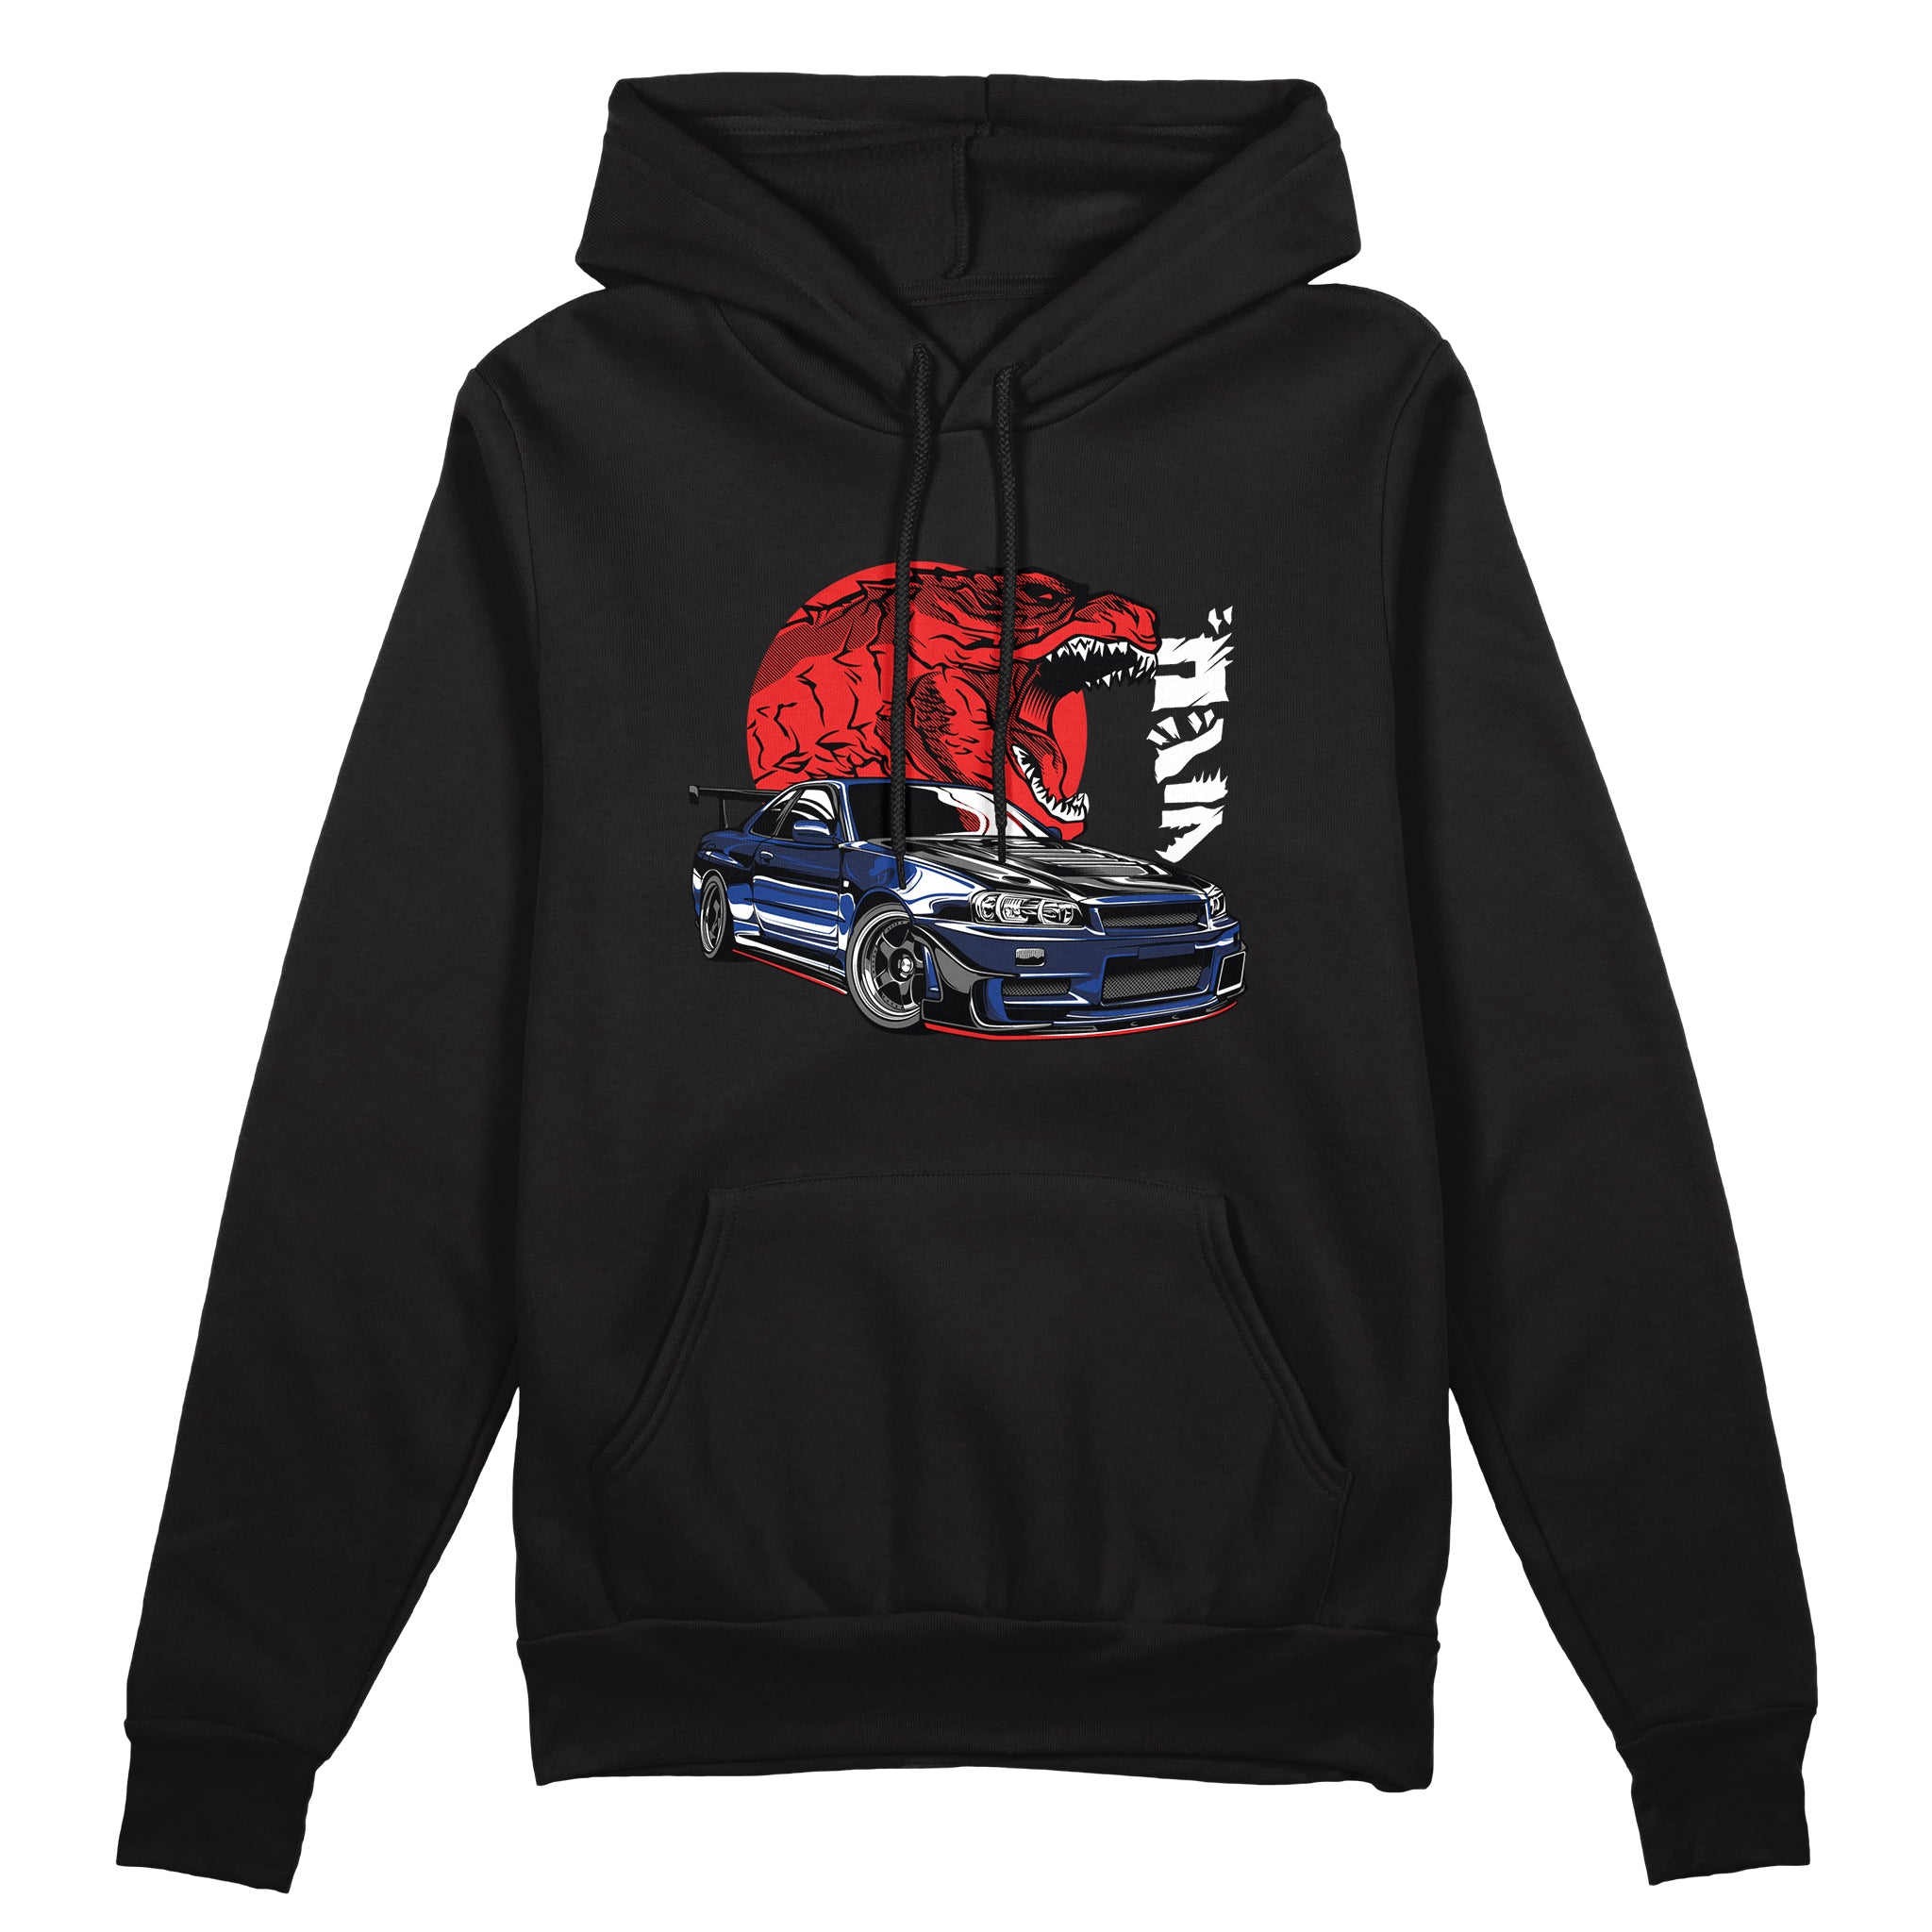 I Fix Cars Hoodie - Funny Hoodie for Car Lovers